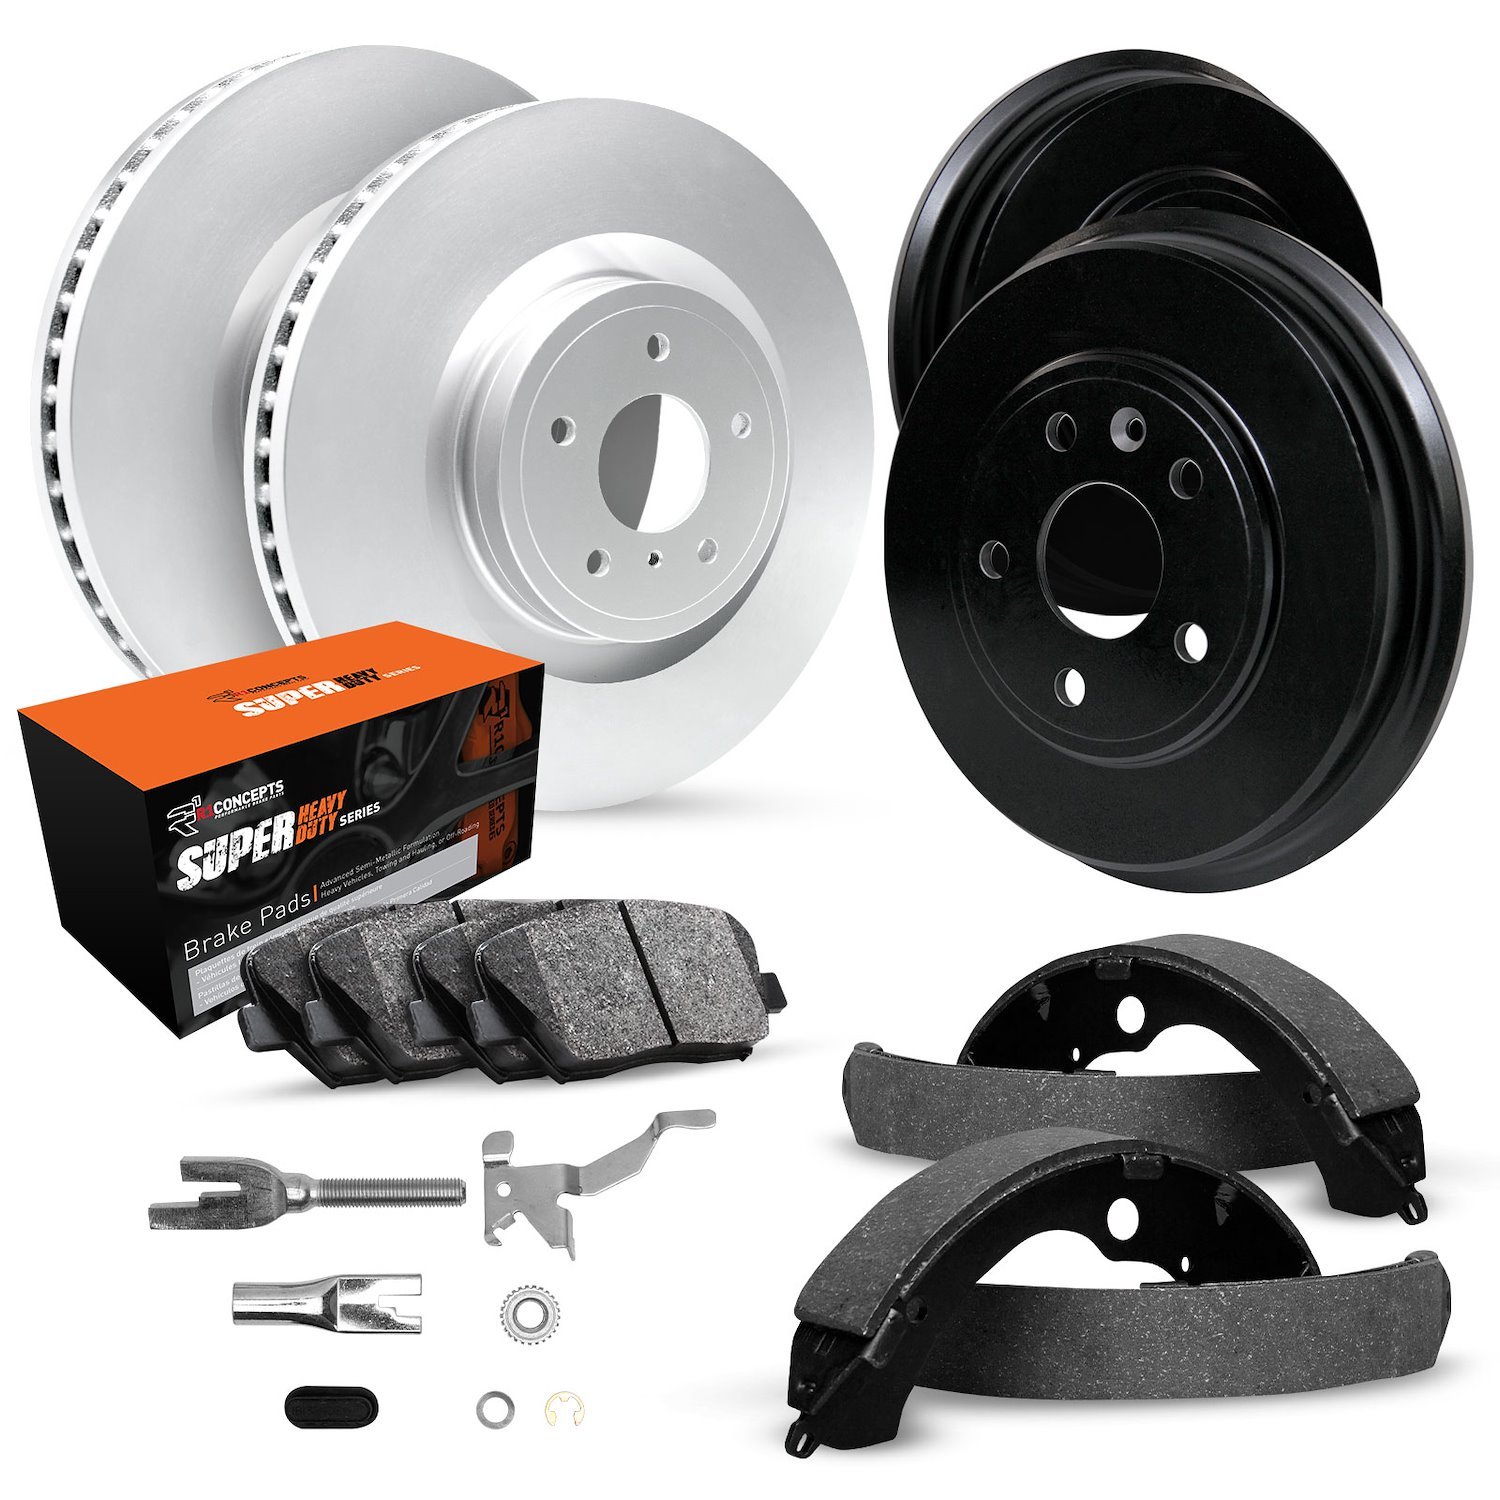 GEO-Carbon Brake Rotor & Drum Set w/Super-Duty Pads, Shoes, & Adjusters, 1974-1996 GM, Position: Front & Rear